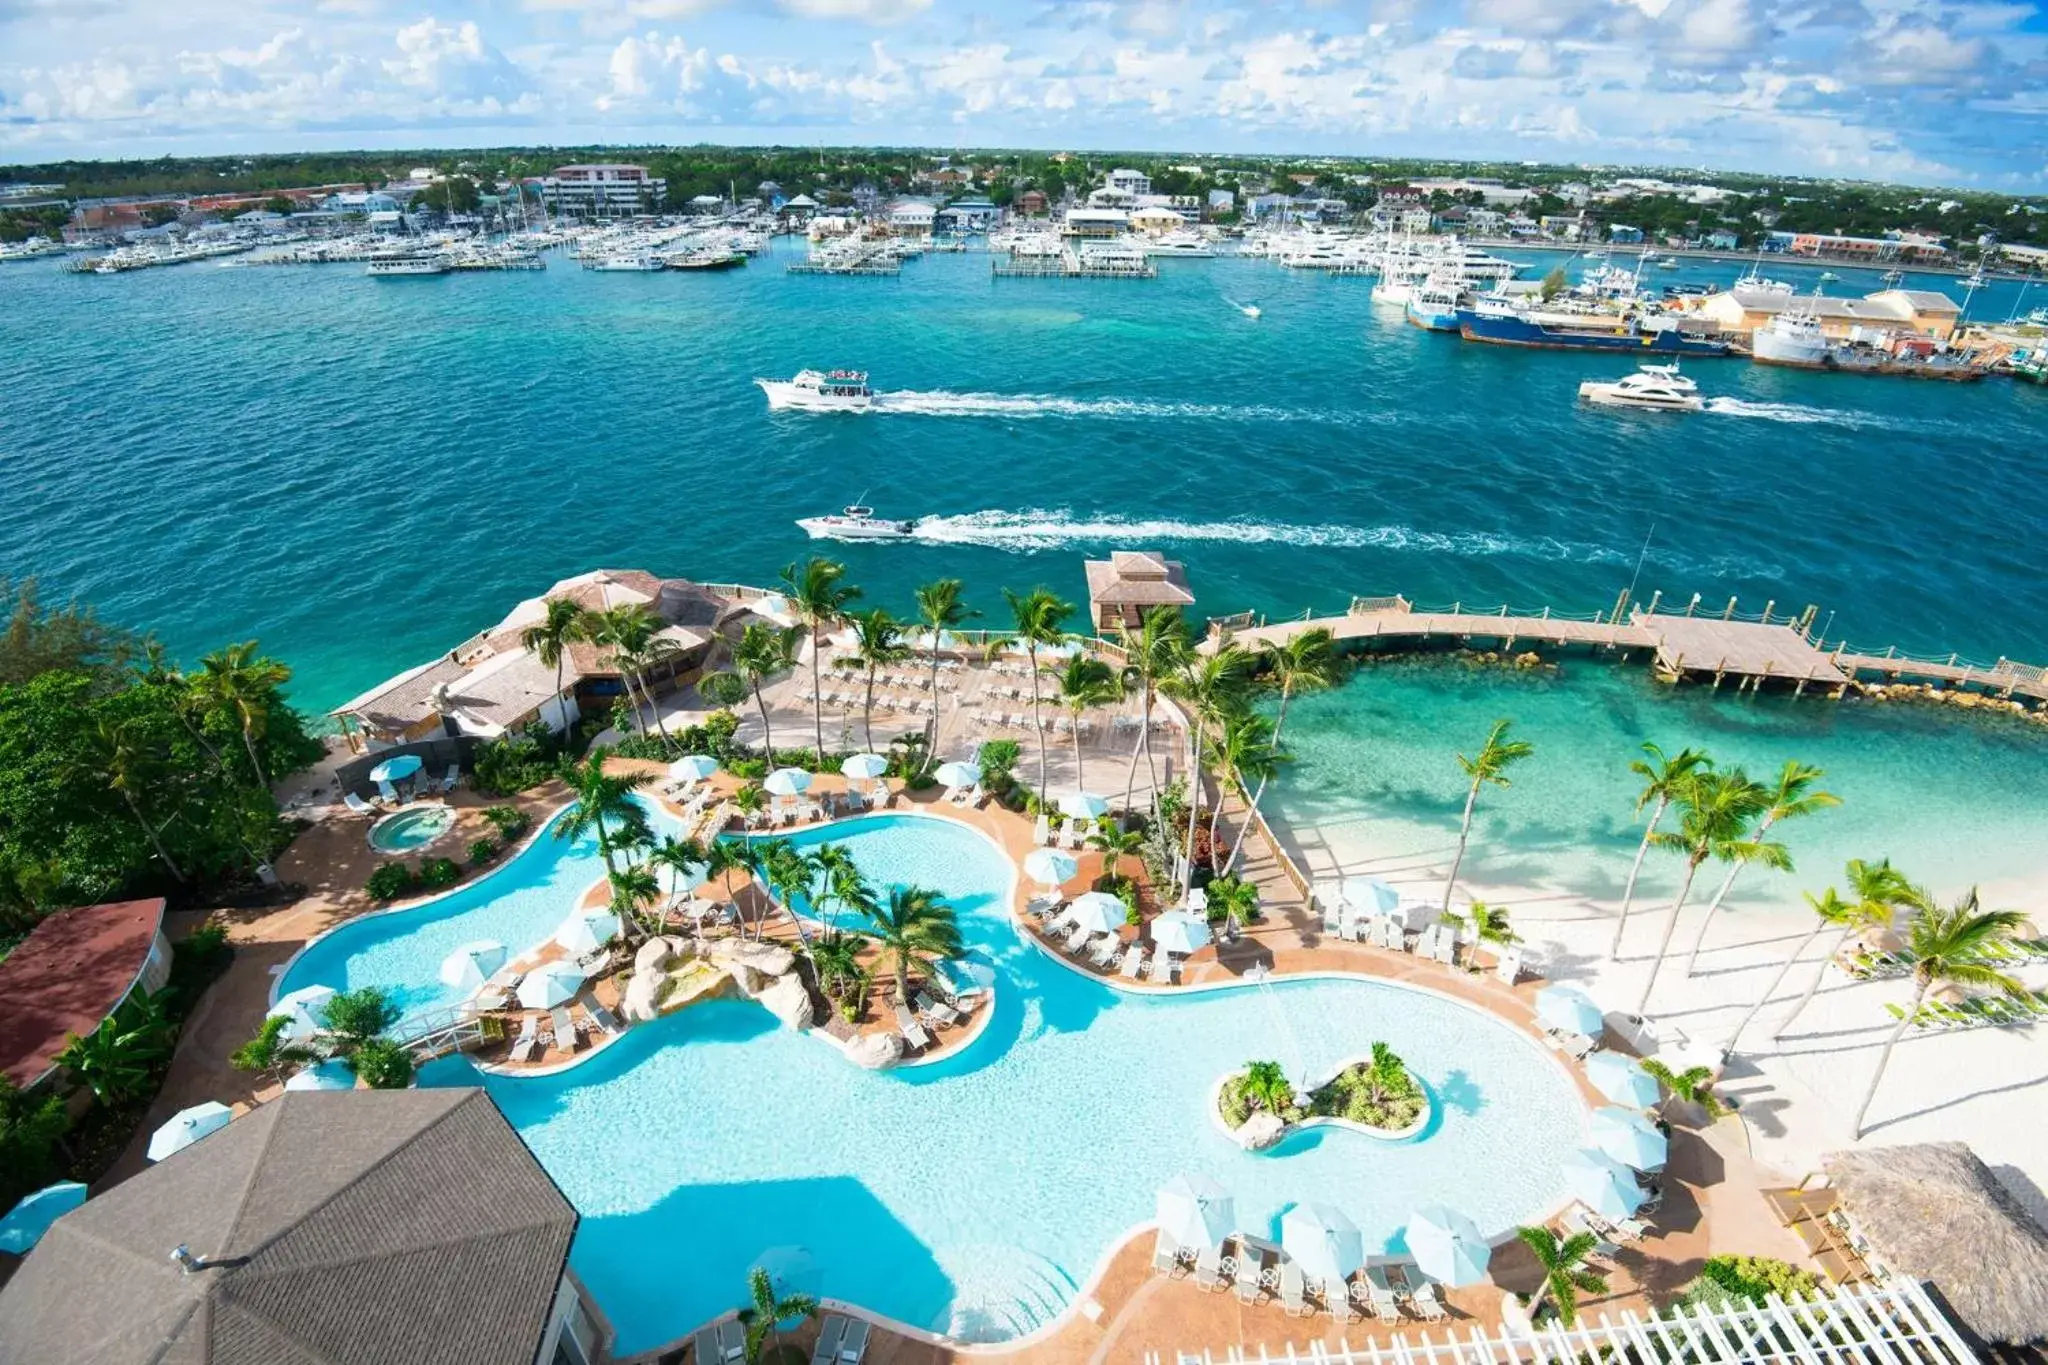 Pool view, Bird's-eye View in Warwick Paradise Island Bahamas - All Inclusive - Adults Only